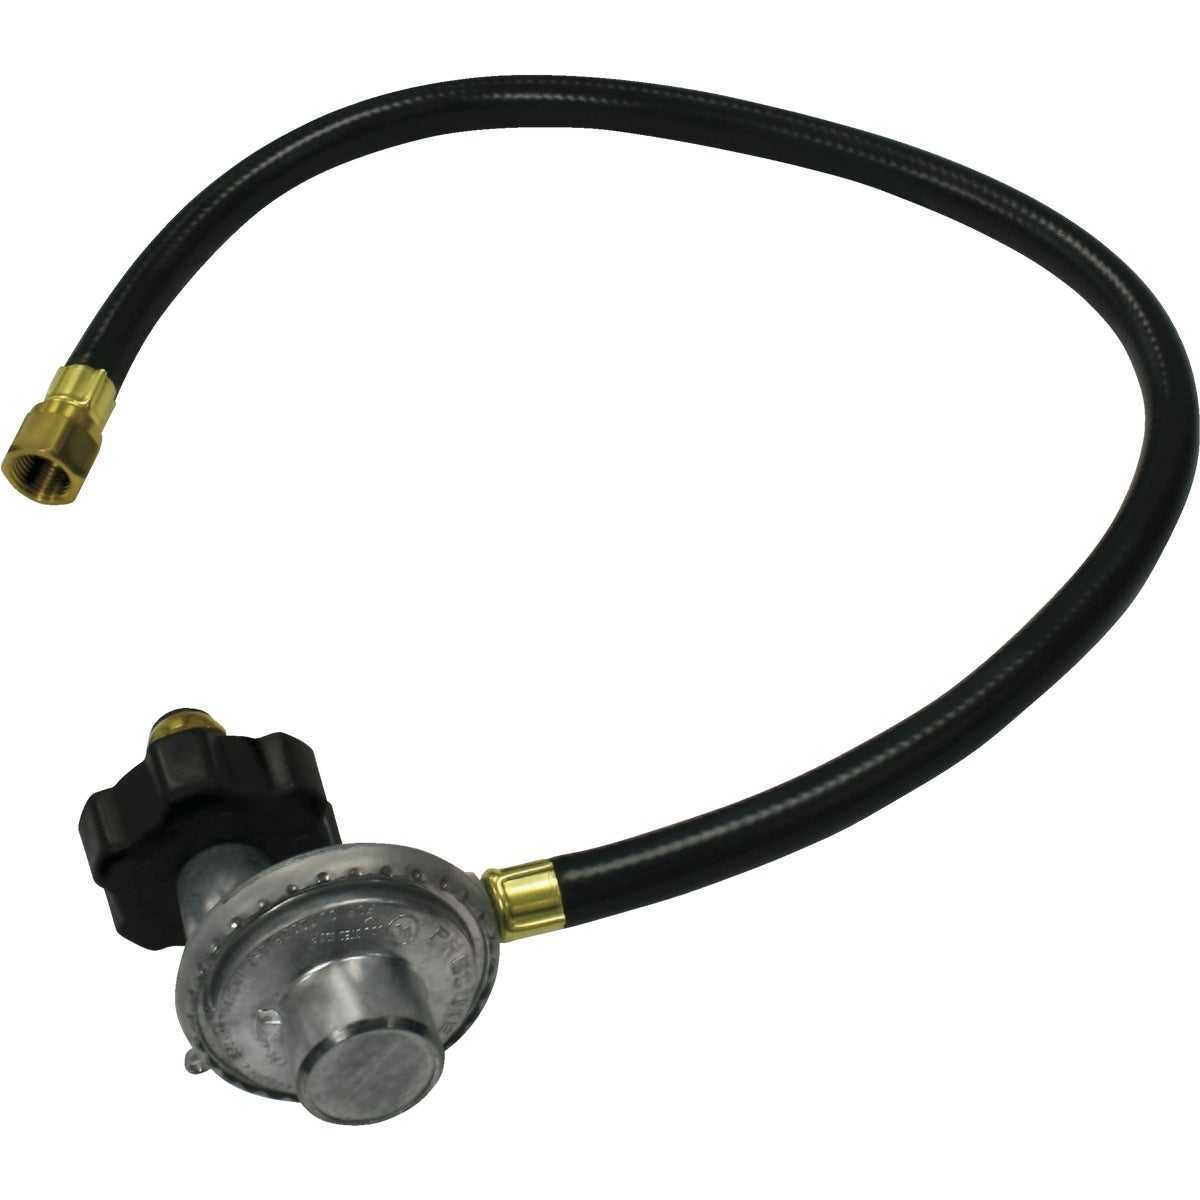 Item 800132, Replacement POL (point of load) hose and regulator.